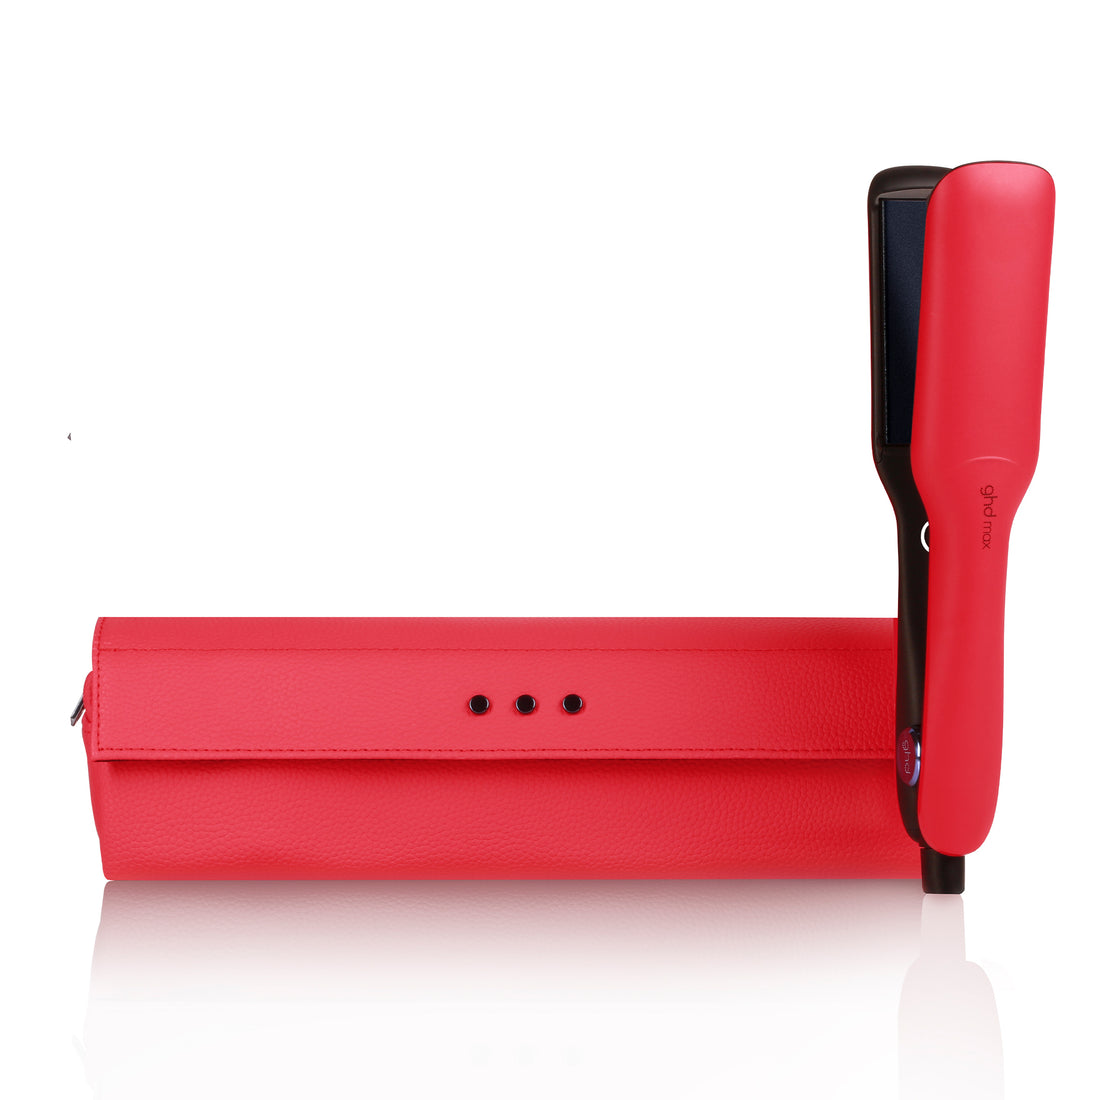 ghd Max - Wide Plate Hair Straightener in Radiant Red